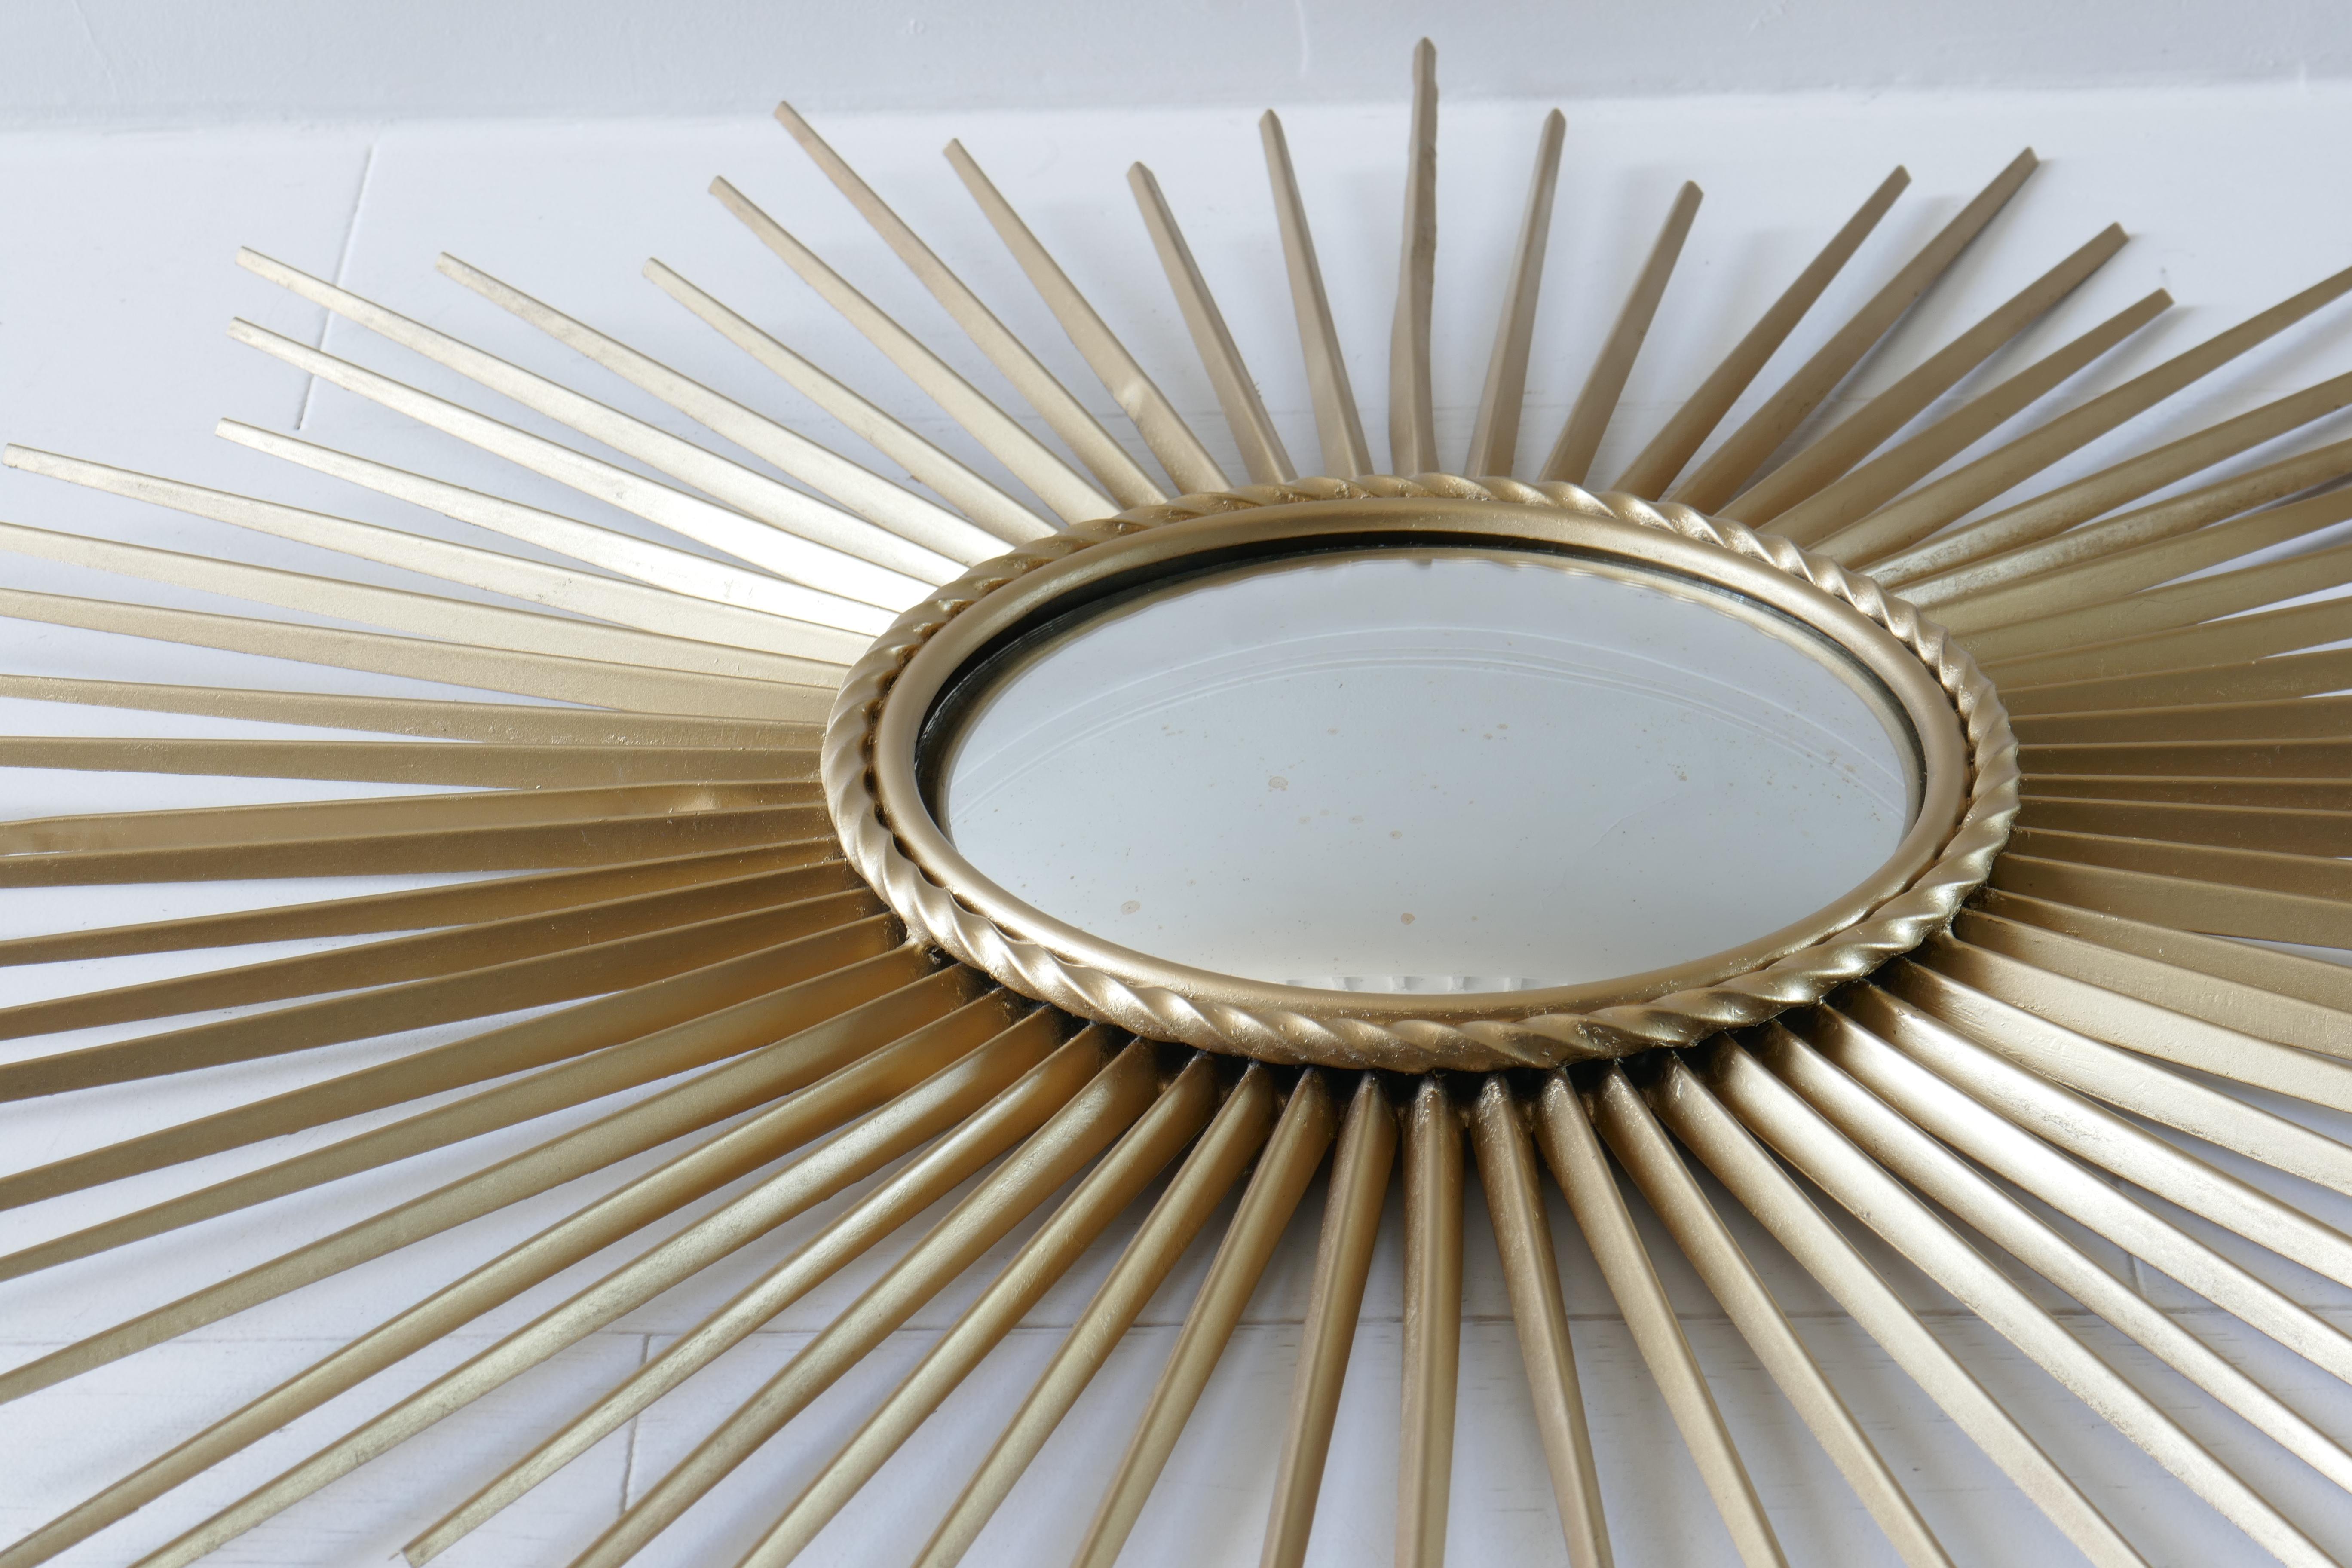 Large sunburst convex mirror by Chaty Vallauris. Stunning handcrafted iron overlaid in brass finish.
Central mirror is 9 inches whilst the frame is 25.5 inches.
Signed in the back. 
France,1960s.